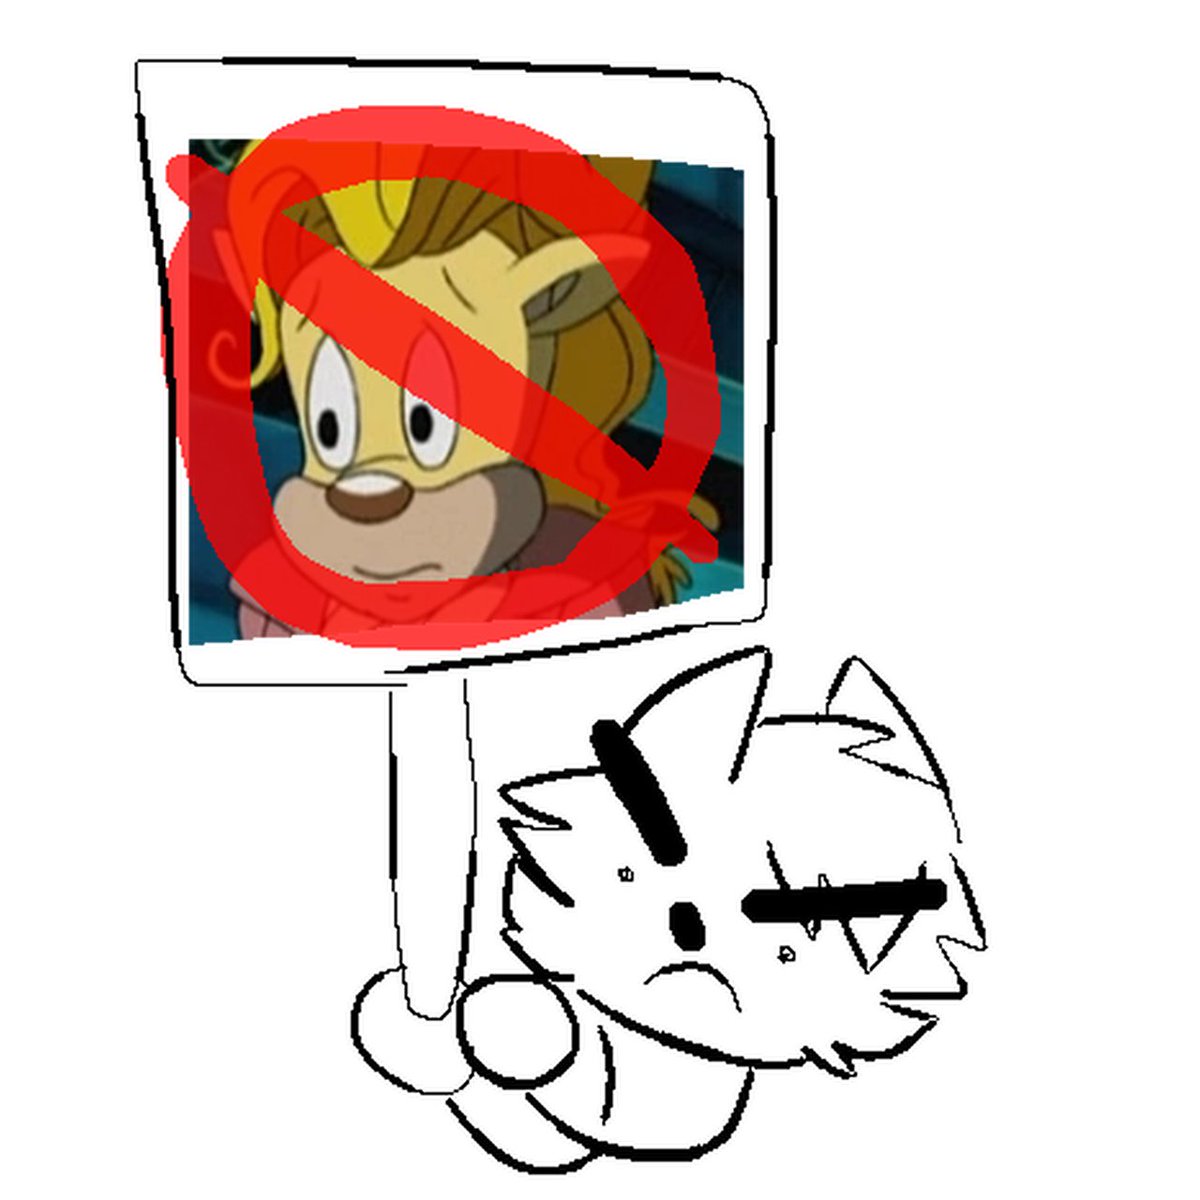 Sonic Underground Rant
I F—KING HATE BARTLEBY
HE IS SO BORING AS HELL
MORE BORING THAN A BLONDE BITCH 
I REALLY HATE HOW EVERY RICH MAN IS A WHINY PUSSY.